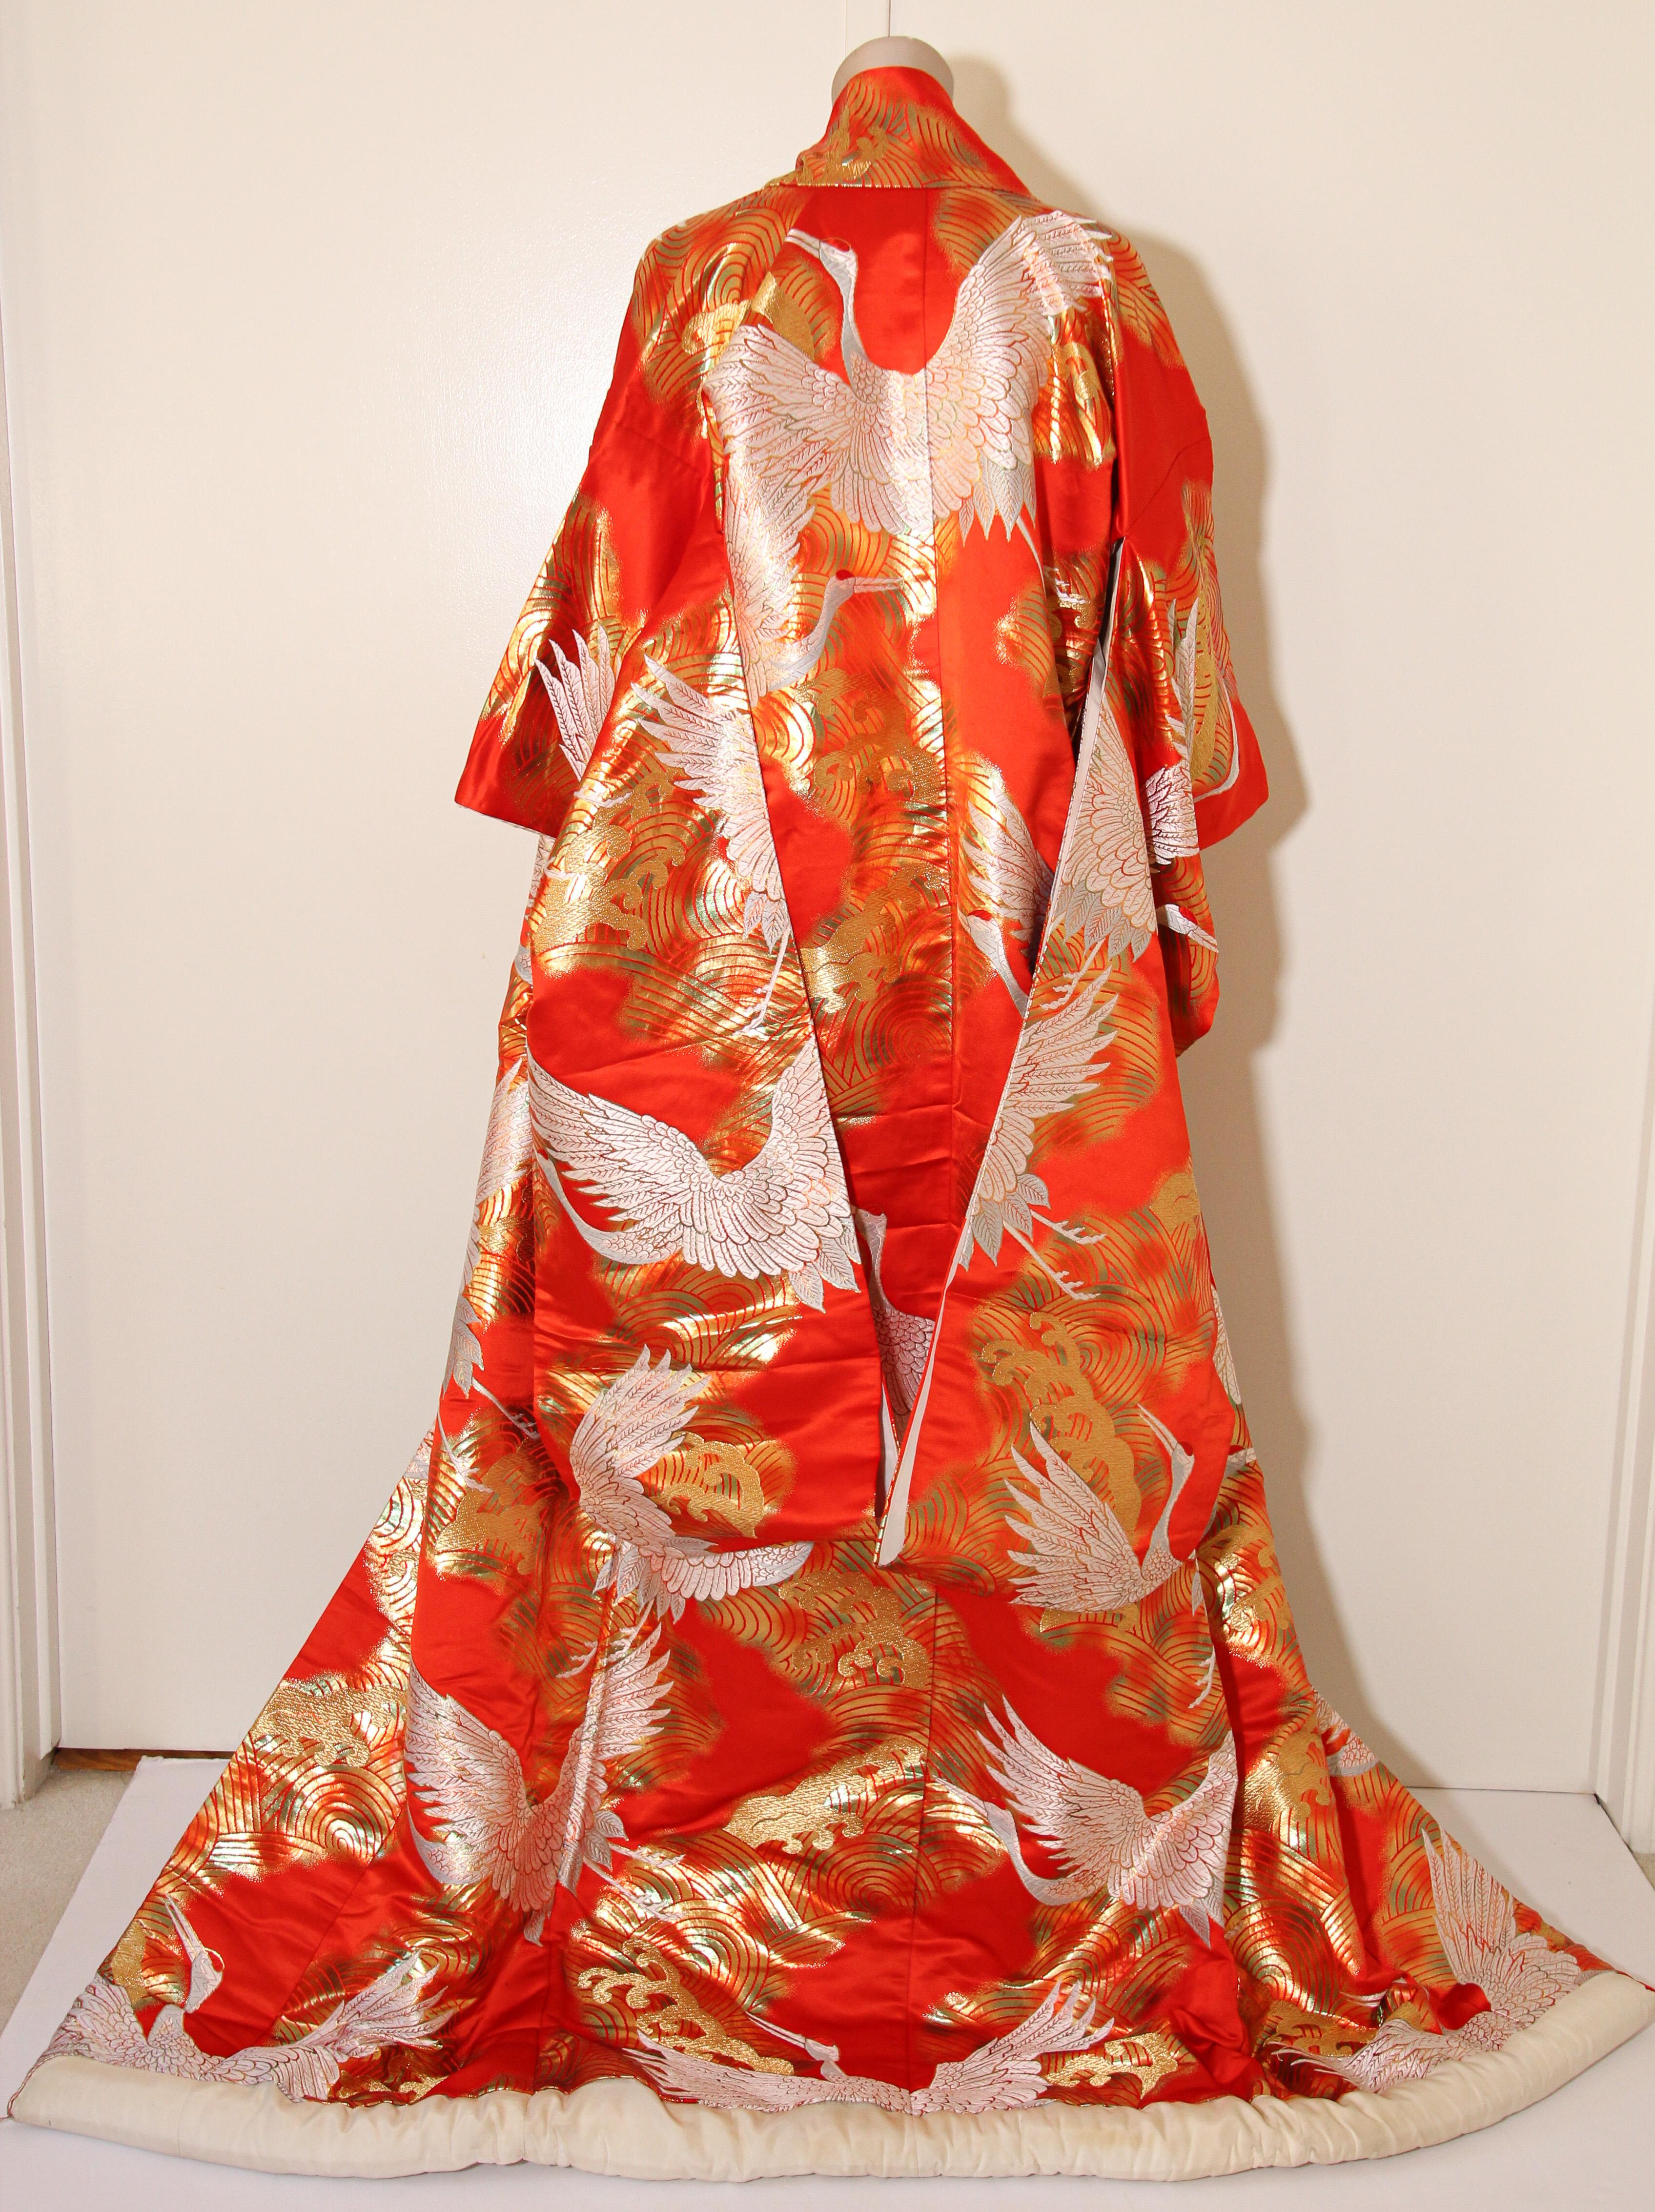 A vintage midcentury red color silk brocade collectable Japanese ceremonial wedding kimono. 
One of a kind handcrafted.
Fabulous museum quality ceremonial piece in pure silk with intricate detailed hand-embroidery throughout accented with gold